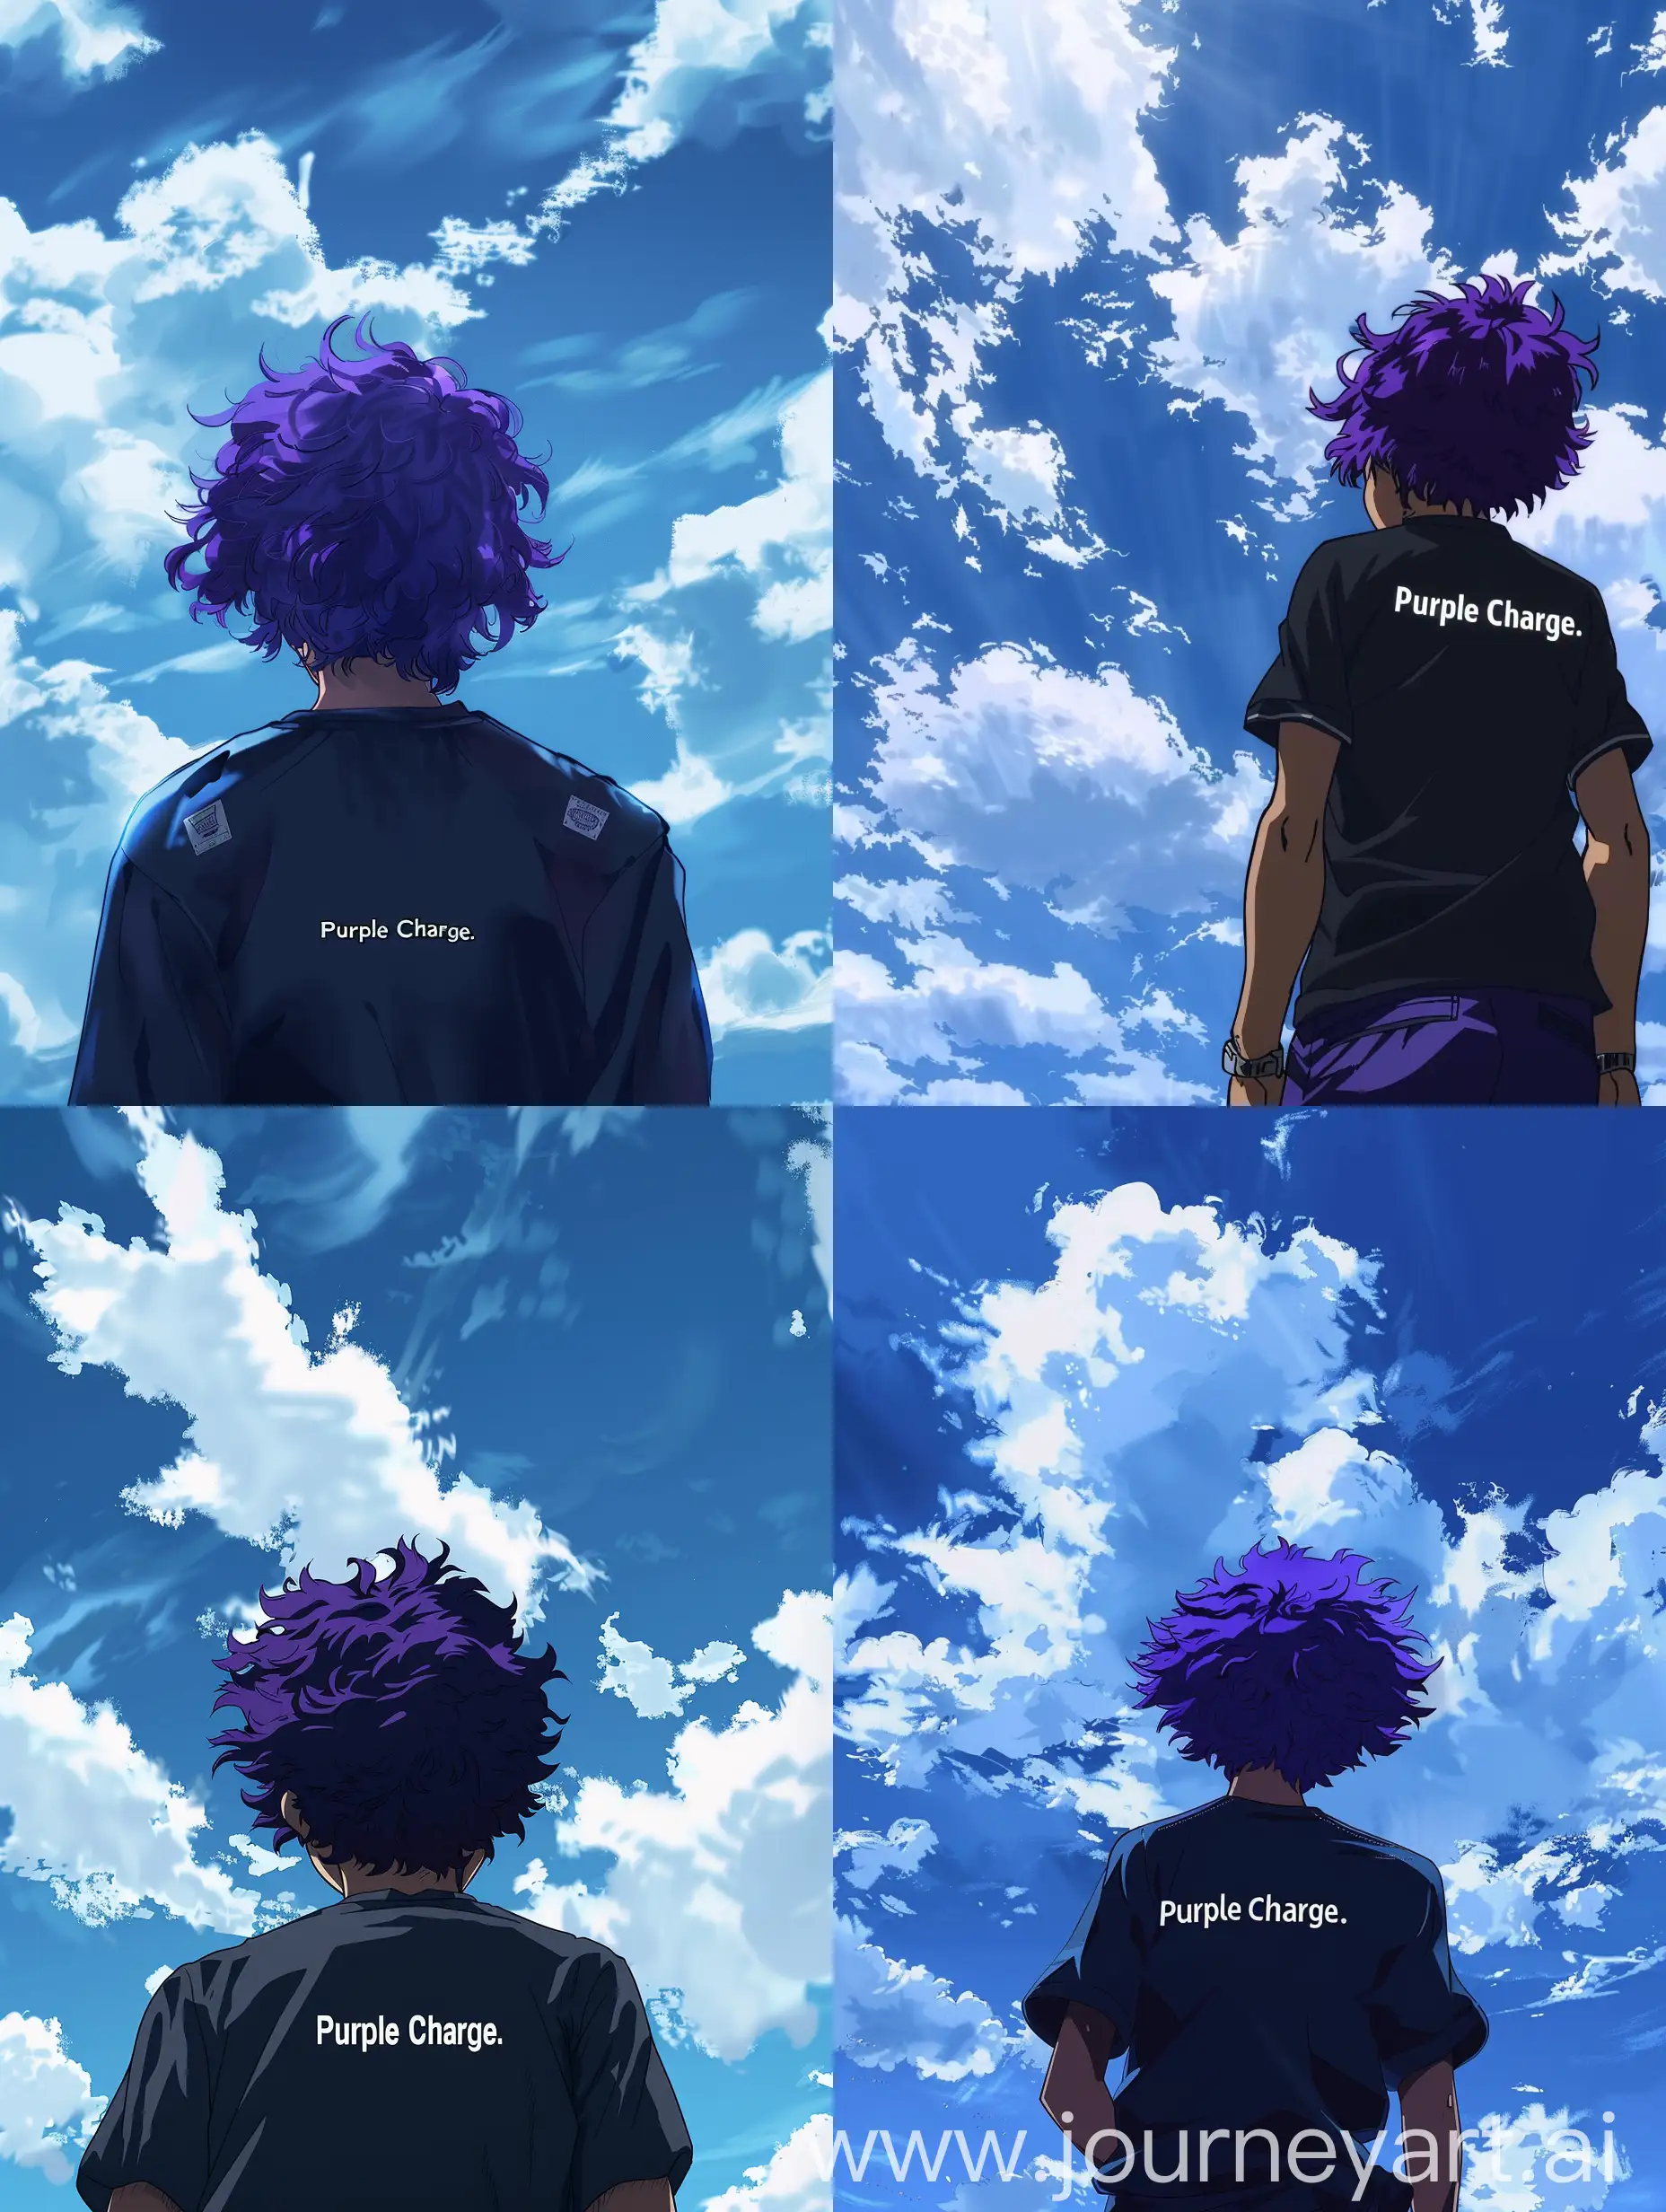 Denki Kaminari from the anime My Hero Academia, but his hair is purple.  All that is shown in the picture is the upper half of Kaminari's body from behind, meaning only his back.  His dark purple hair is also visible.  Neither his limbs nor his face are visible, and on his black shirt on the back is written “Purple Charge.”  Blue sky, white clouds.